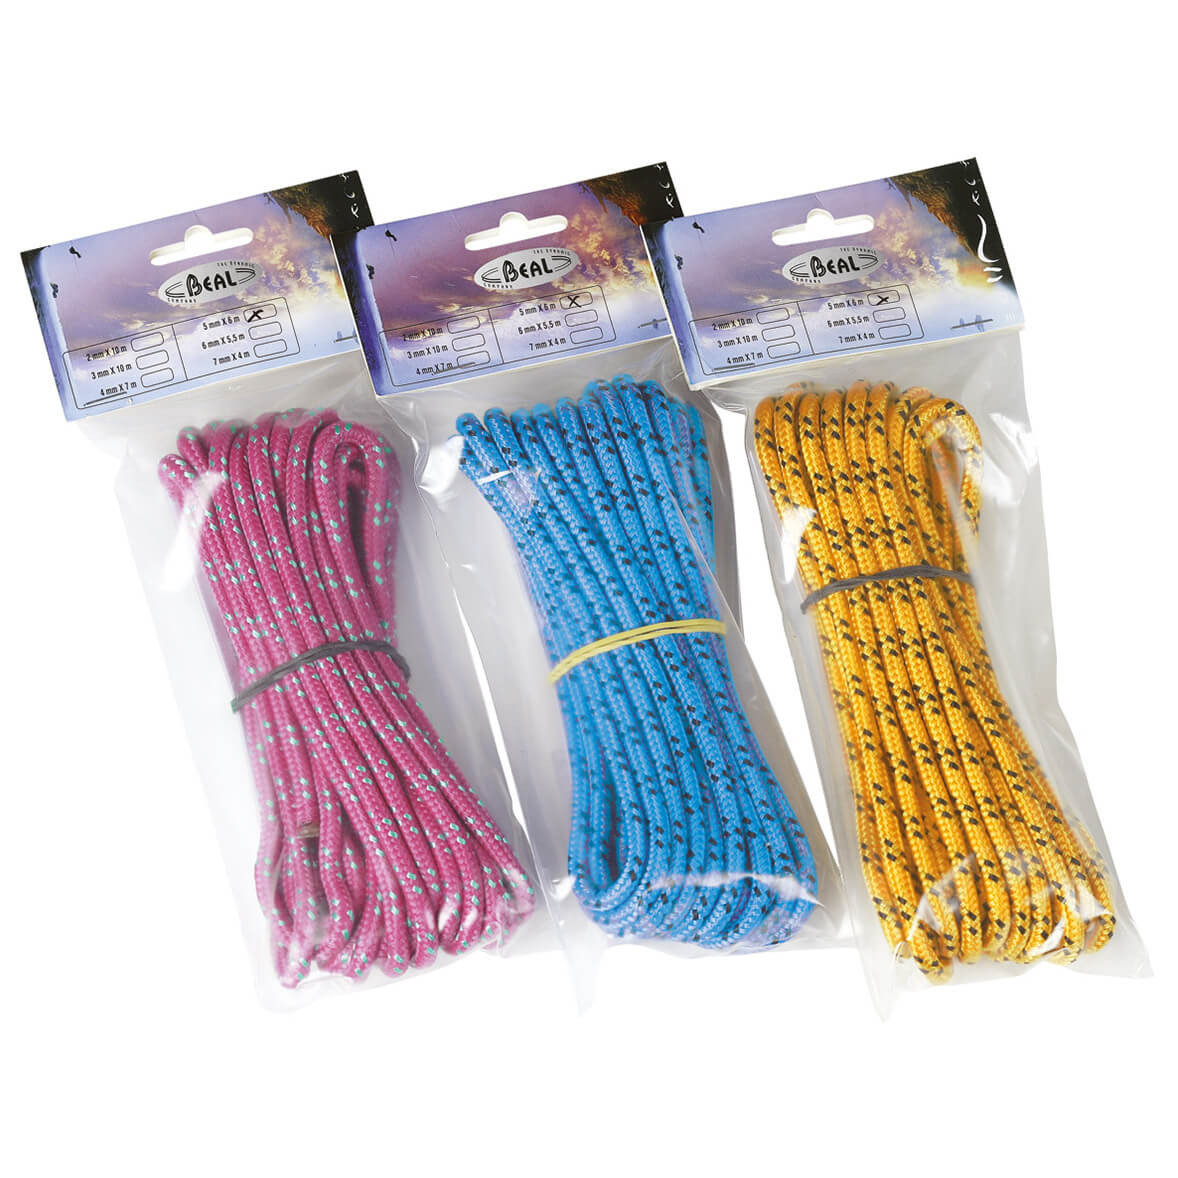 Beal 5 mm Accessory Cord 6 Mtr. Pack